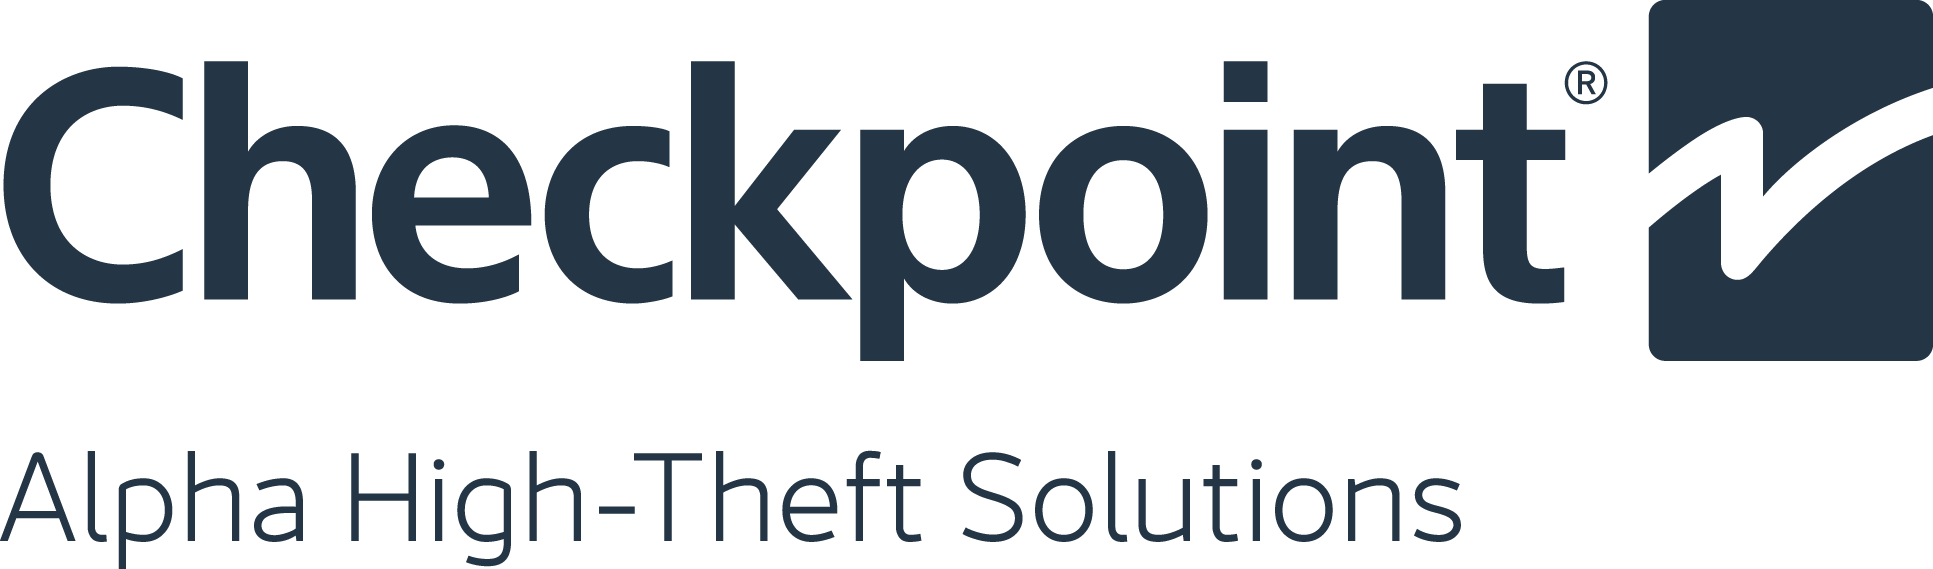 Checkpoint-Logo-ALPHA-Navy (1).png